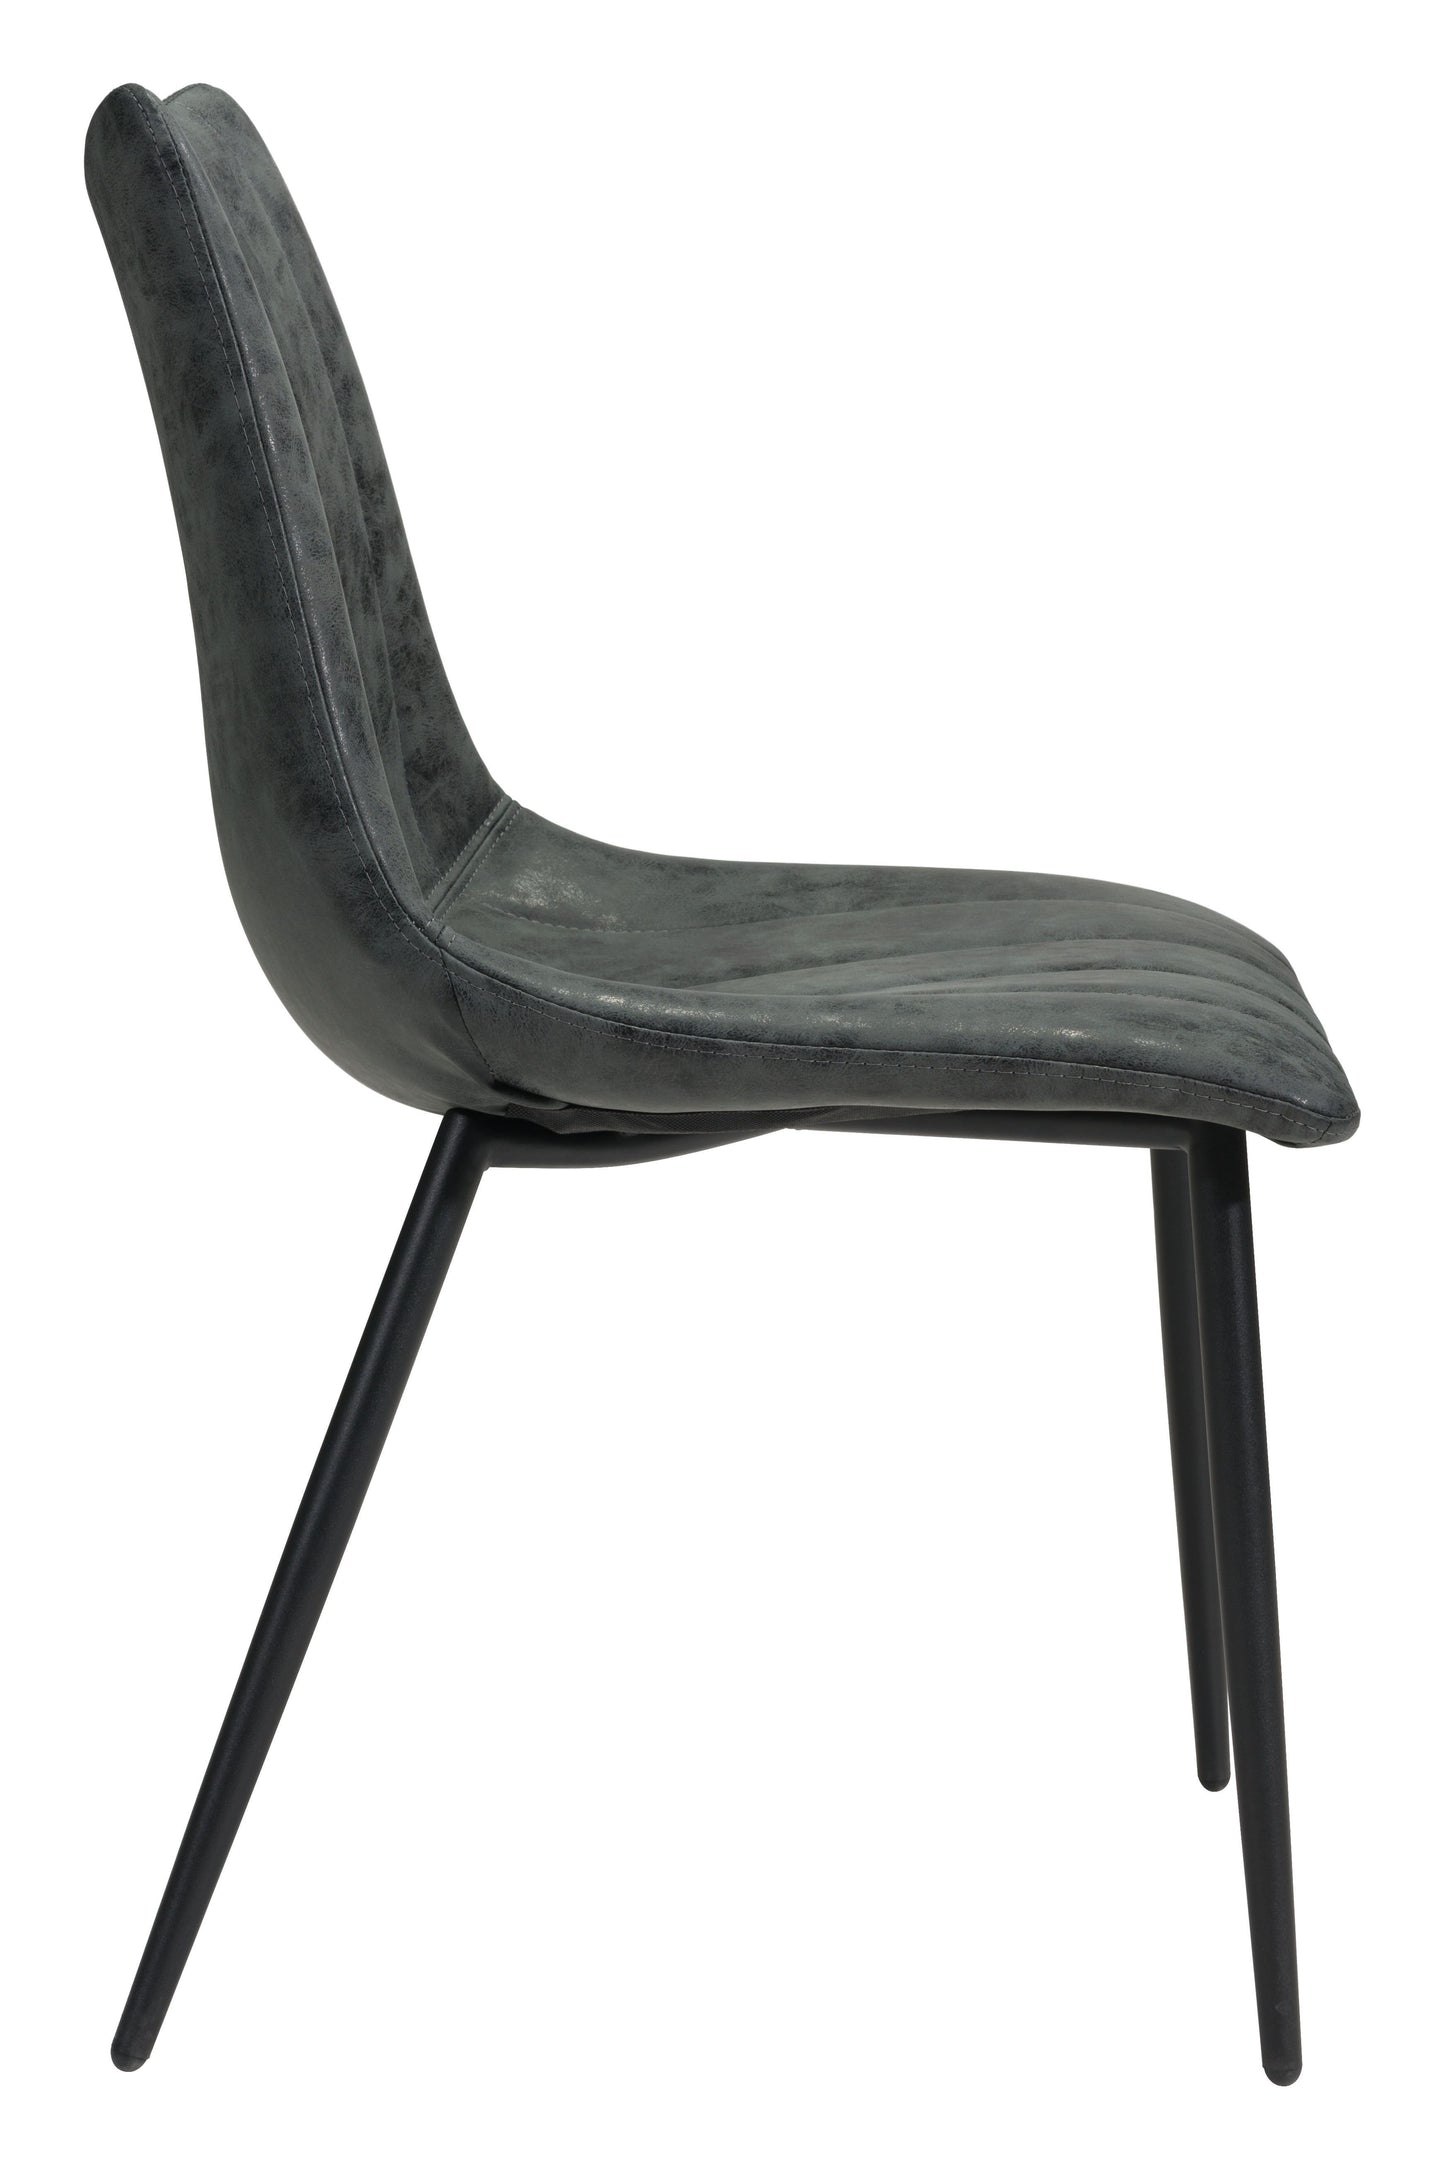 Norwich Dining Chair Vintage Black